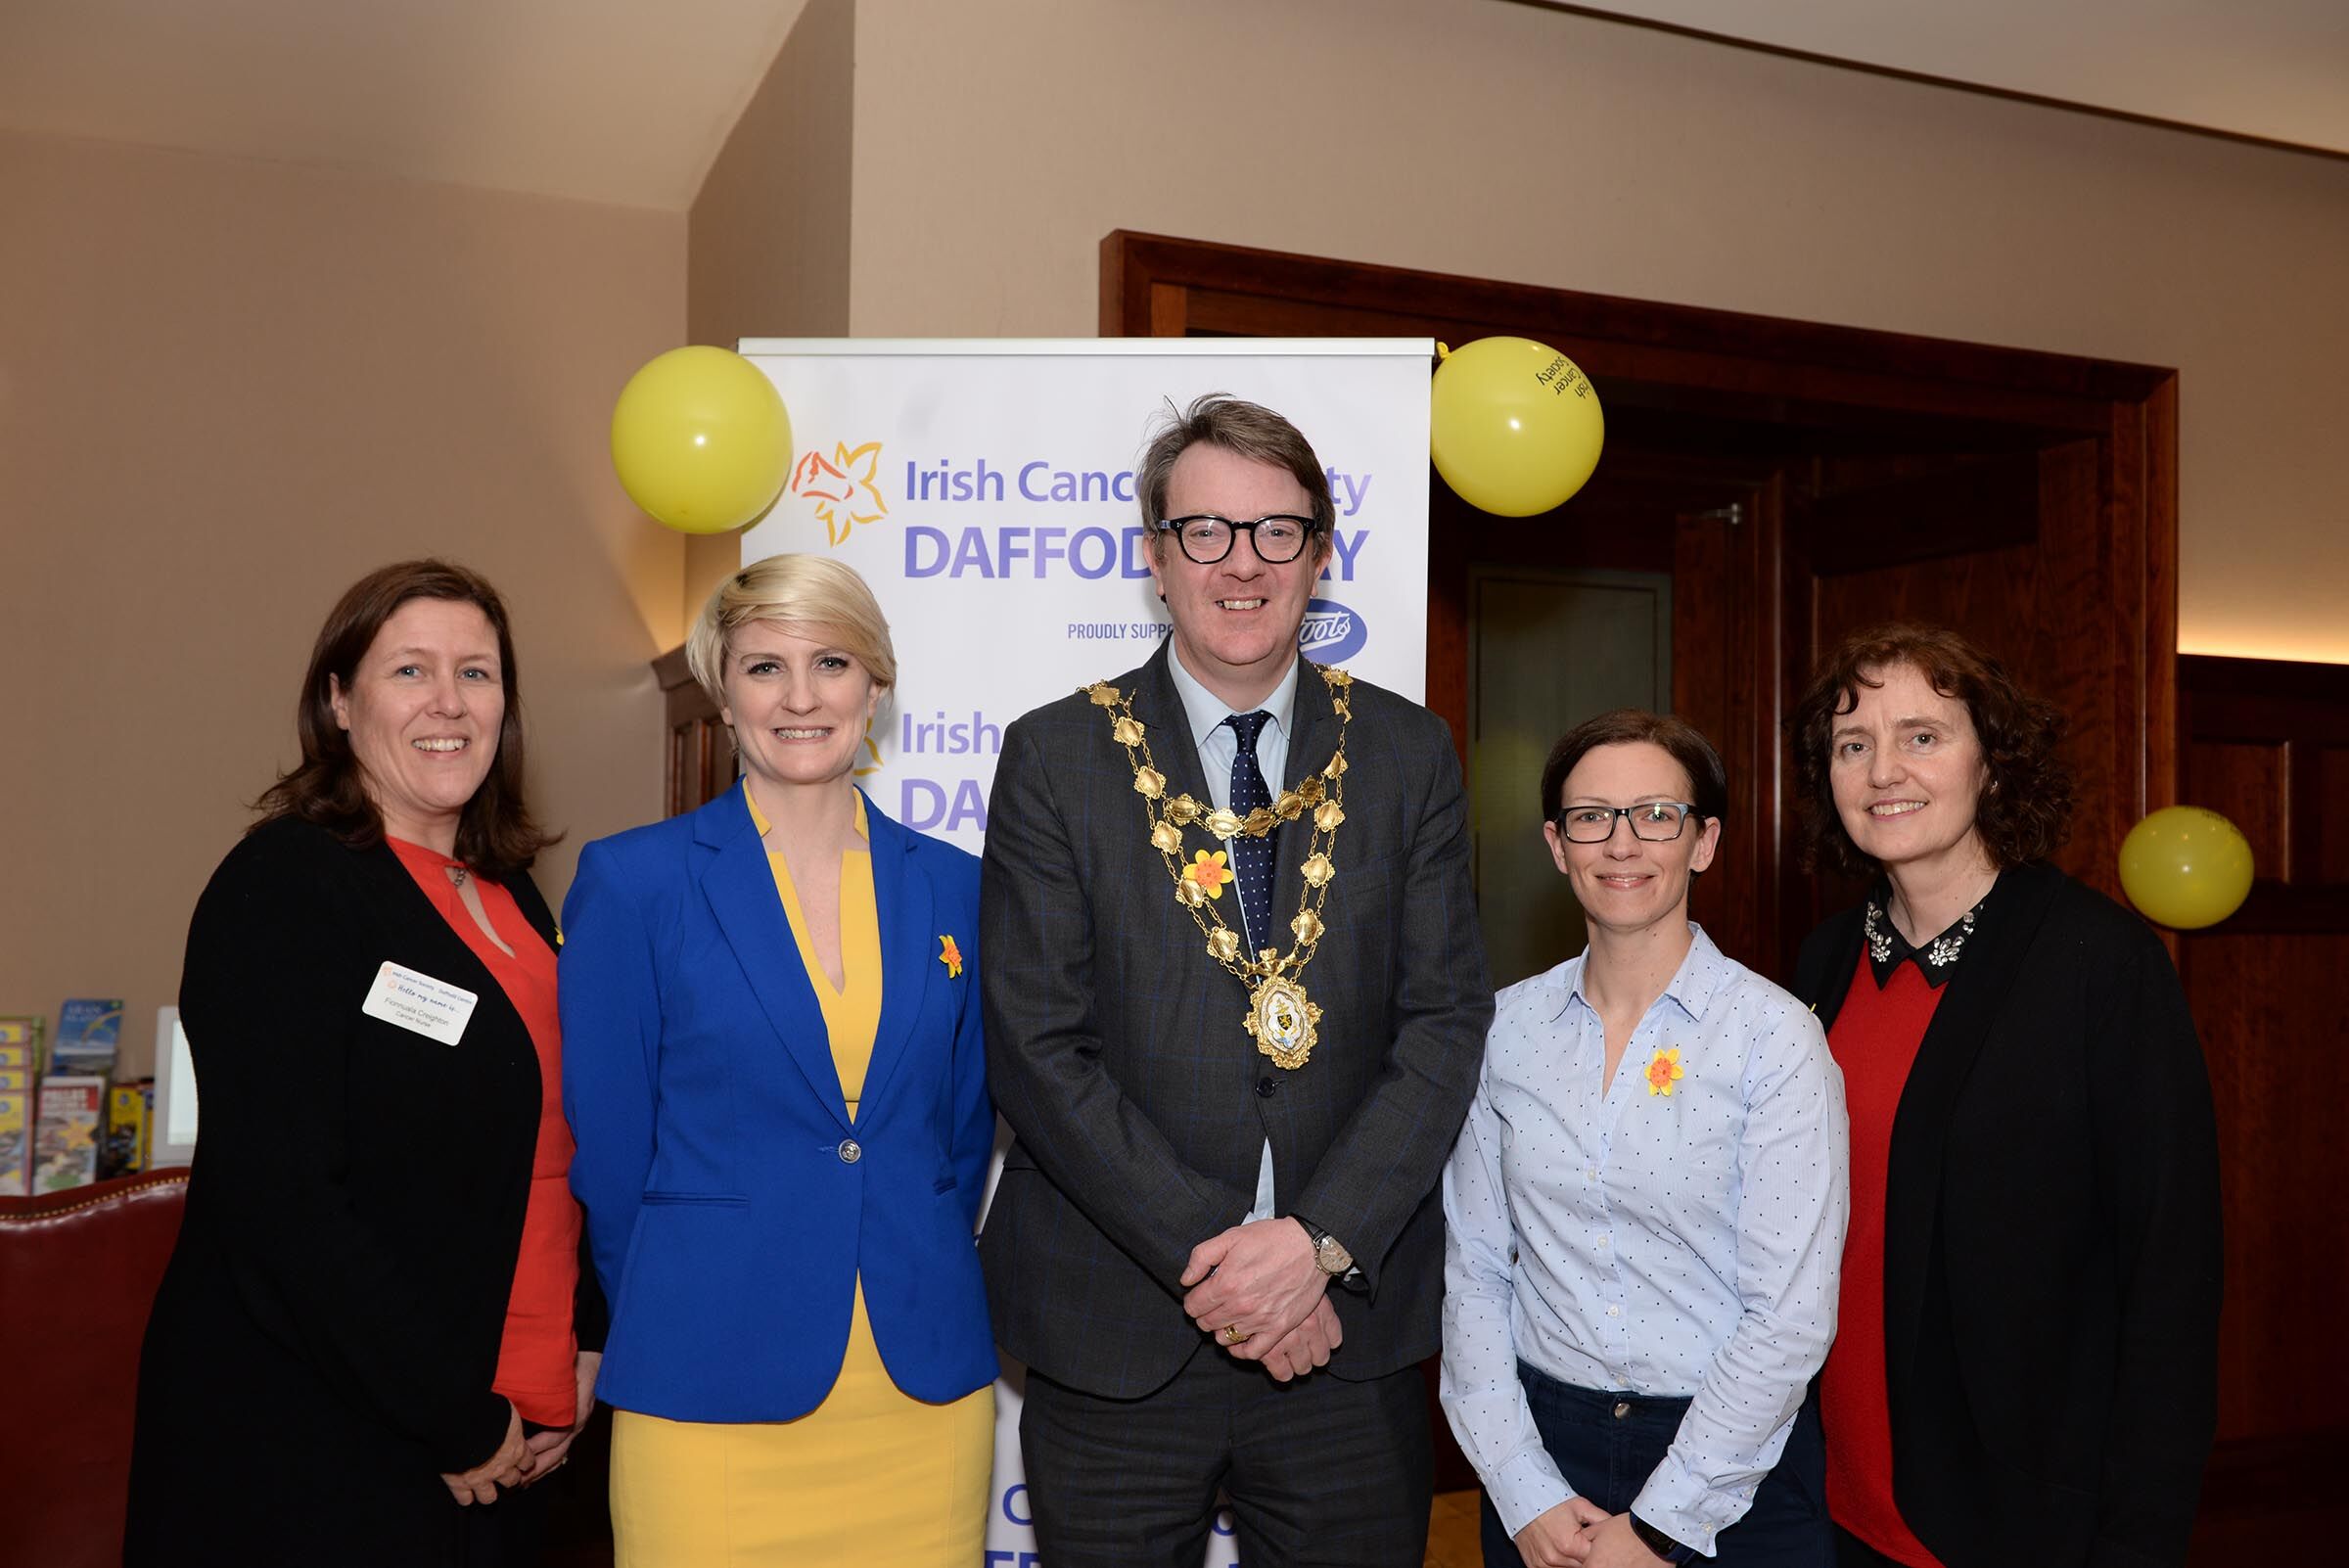 BCNI at Galway launch of daffodil day 2019